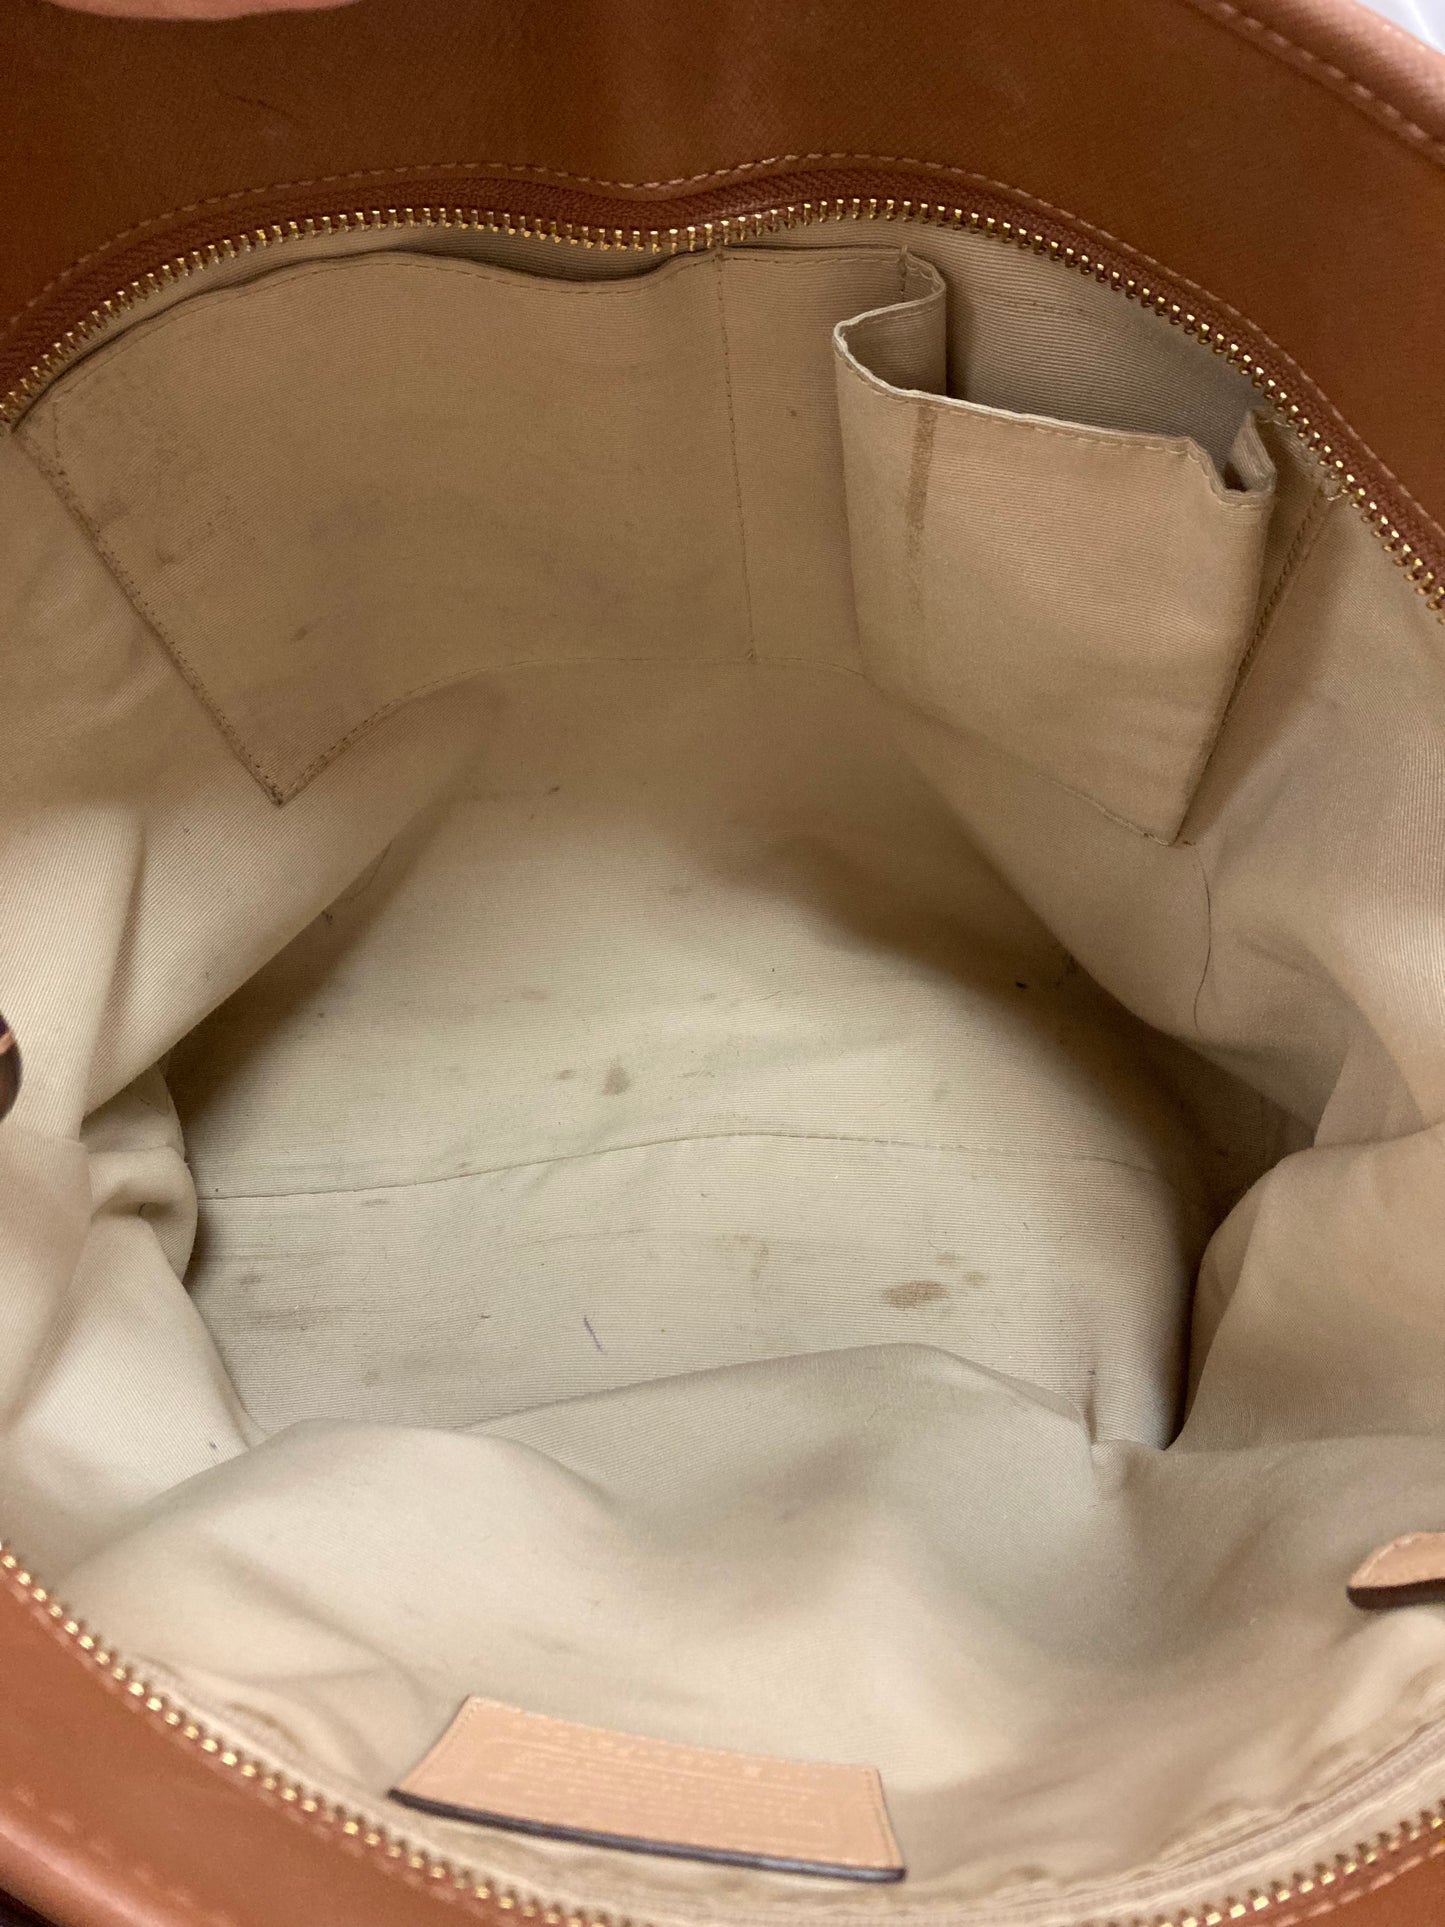 Brown Leather Coach Purse